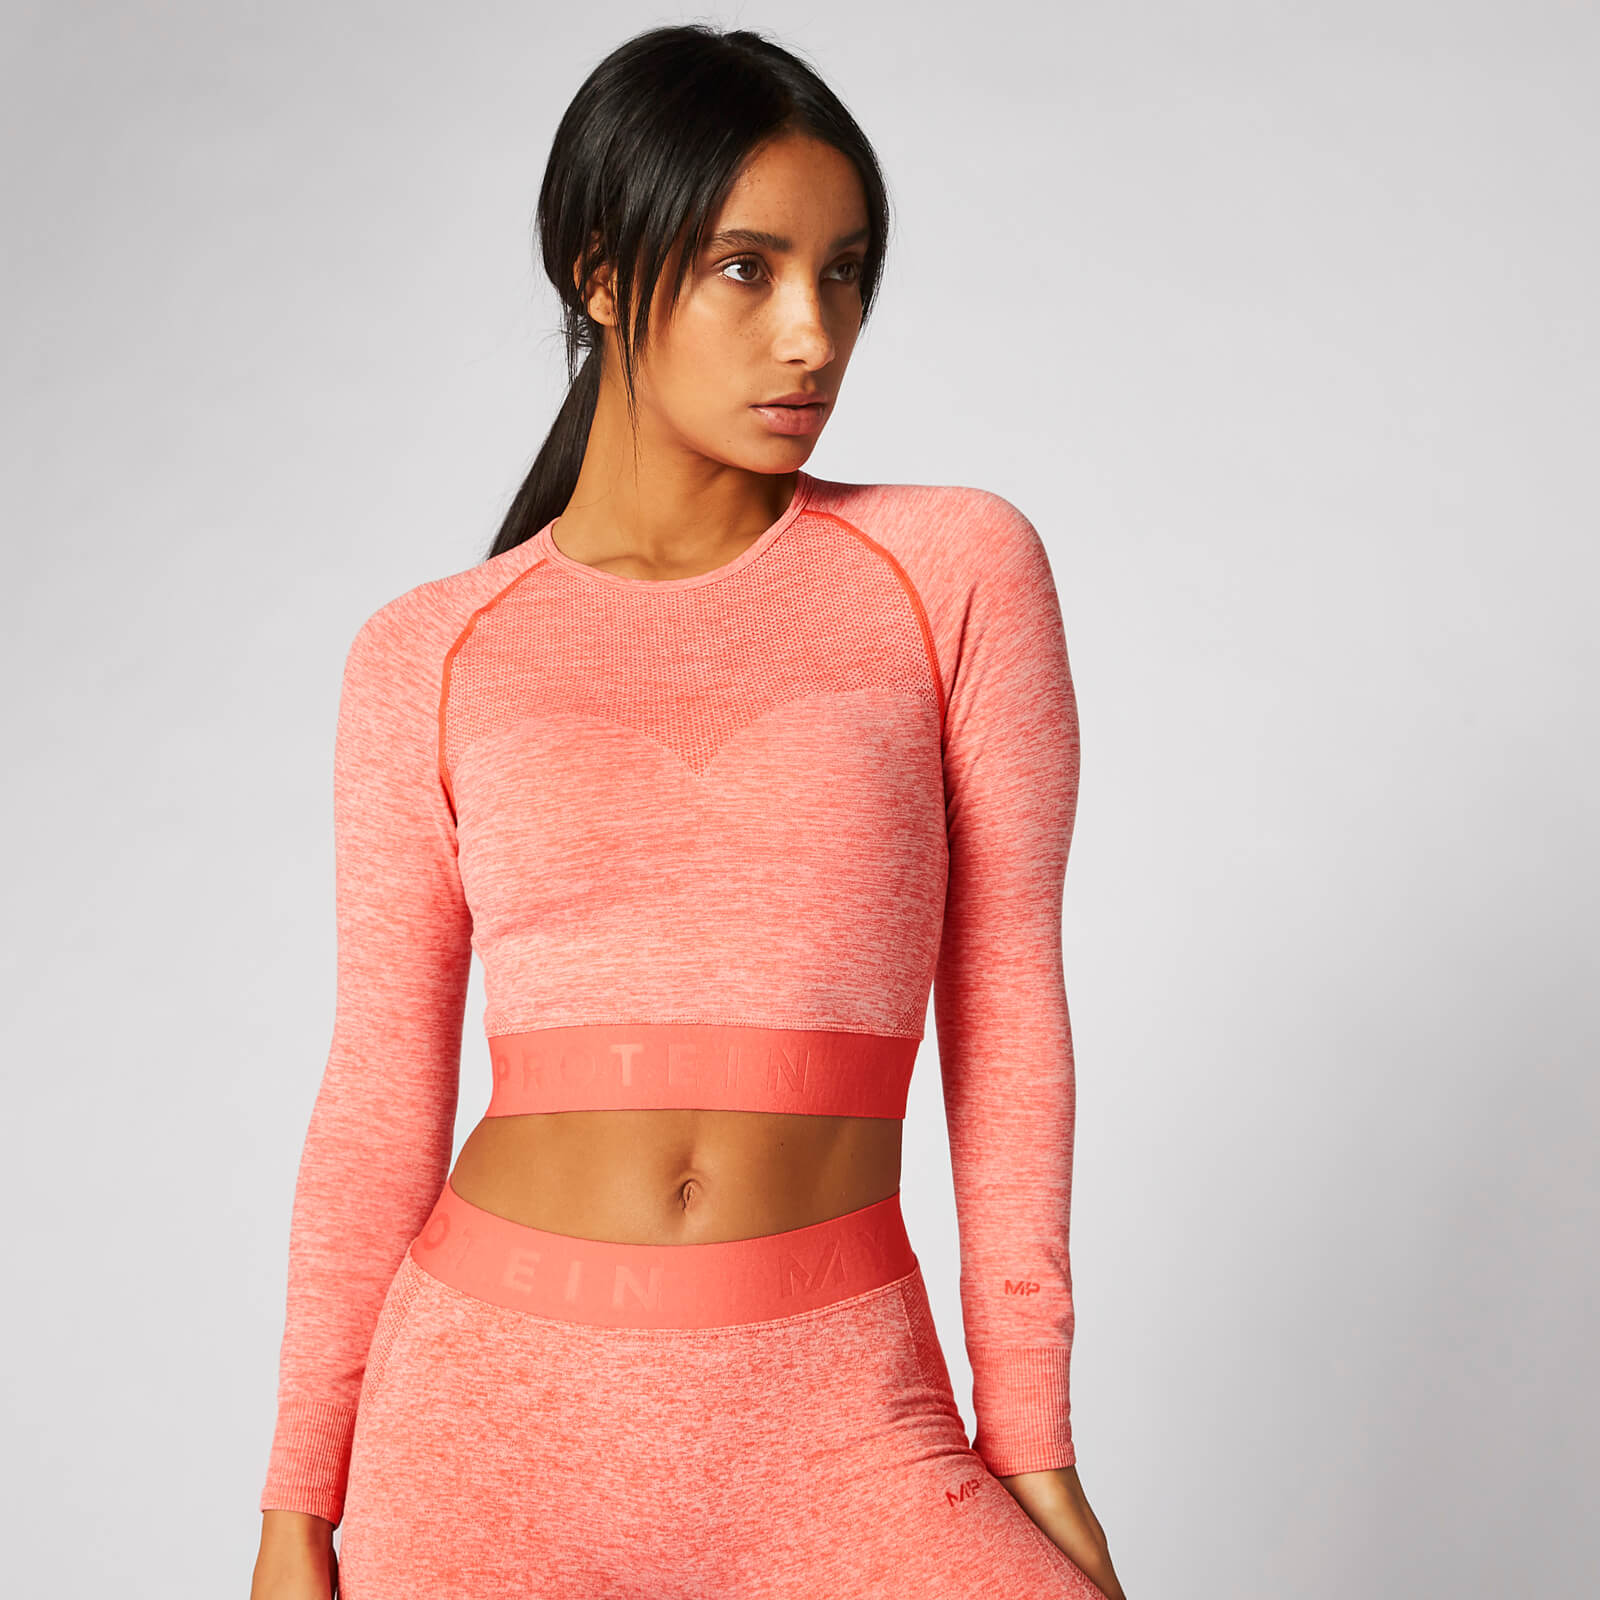 Inspire Seamless Crop Top - Hot Coral - M